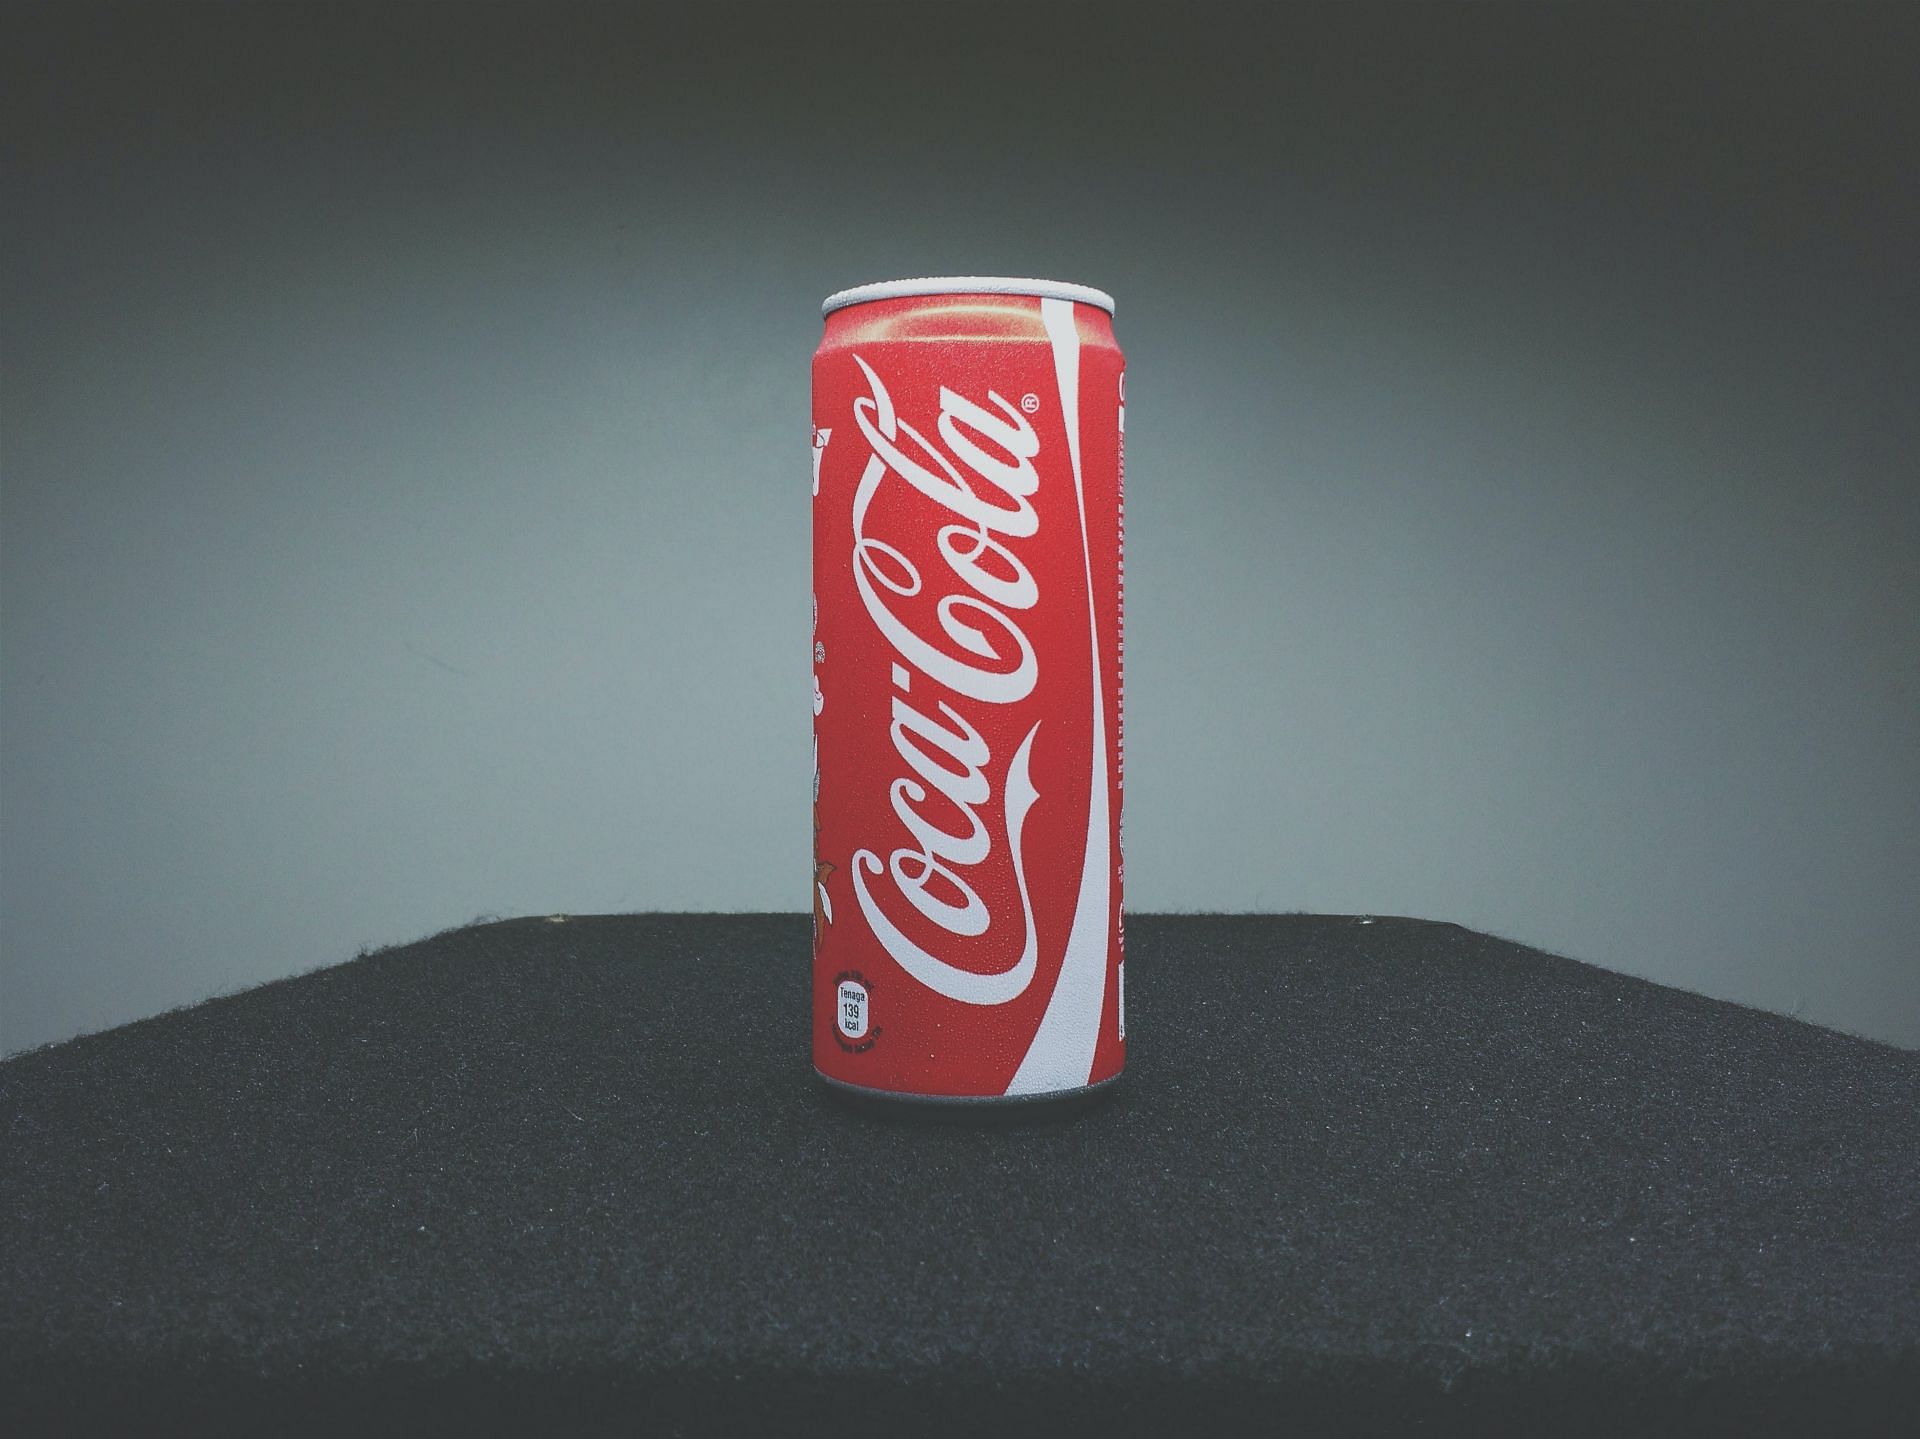 Can you drink diet coke while pregnant (image sourced via Pexels / Photo by Donald tong)